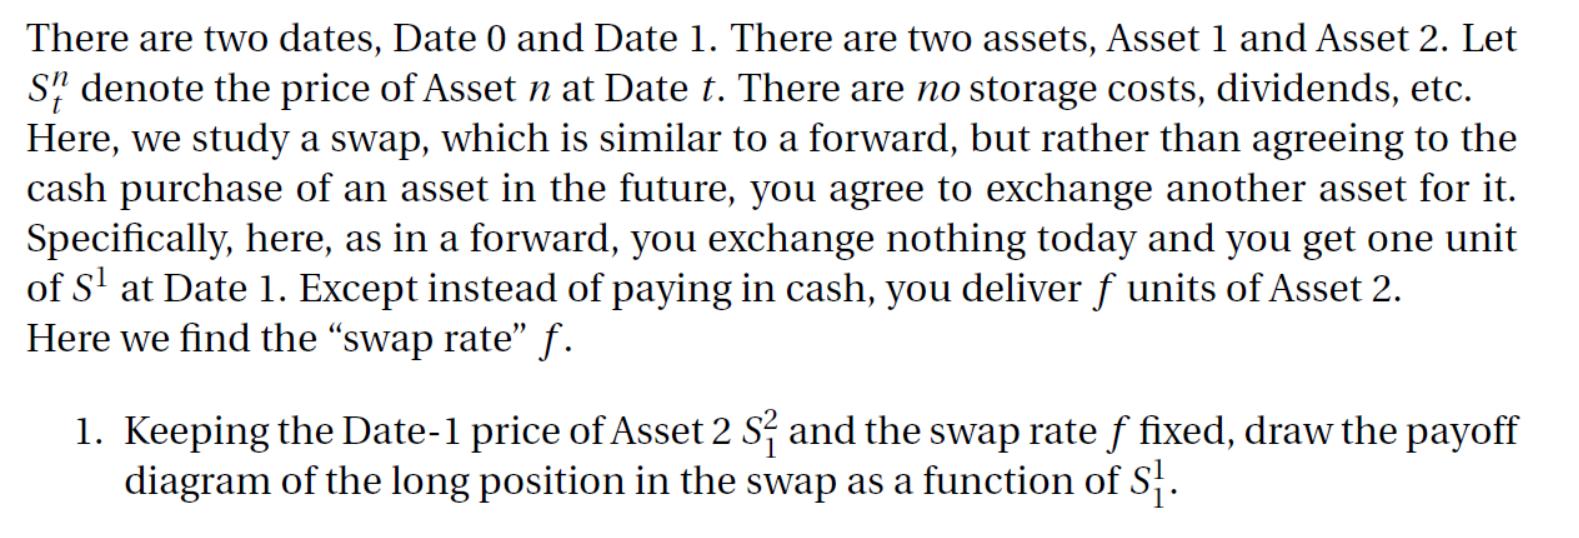 There are two dates, Date 0 and Date 1. There are two assets, Asset 1 and Asset 2. Let S denote the price of